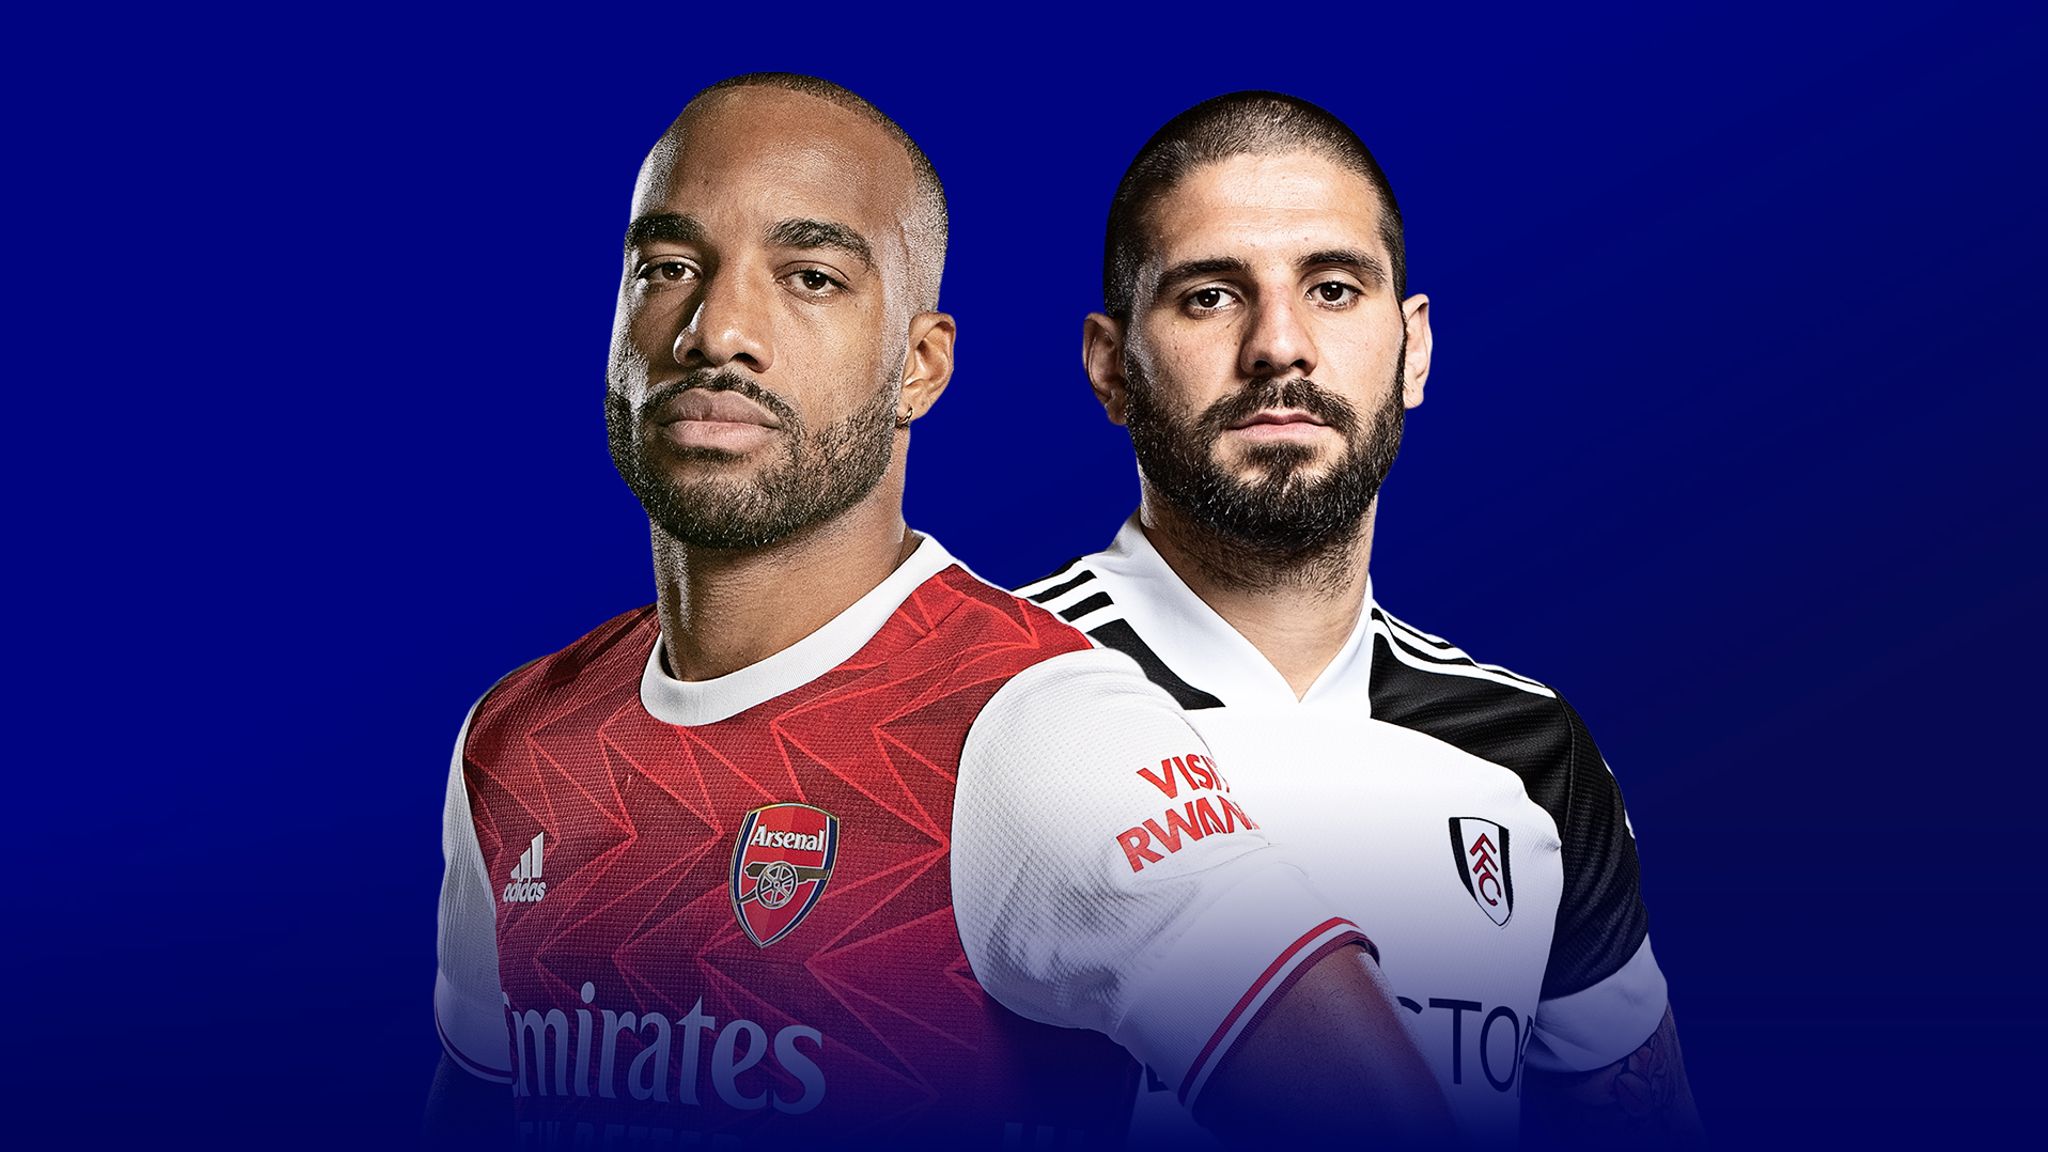 Fulham vs Barnsley prediction, preview, team news and more